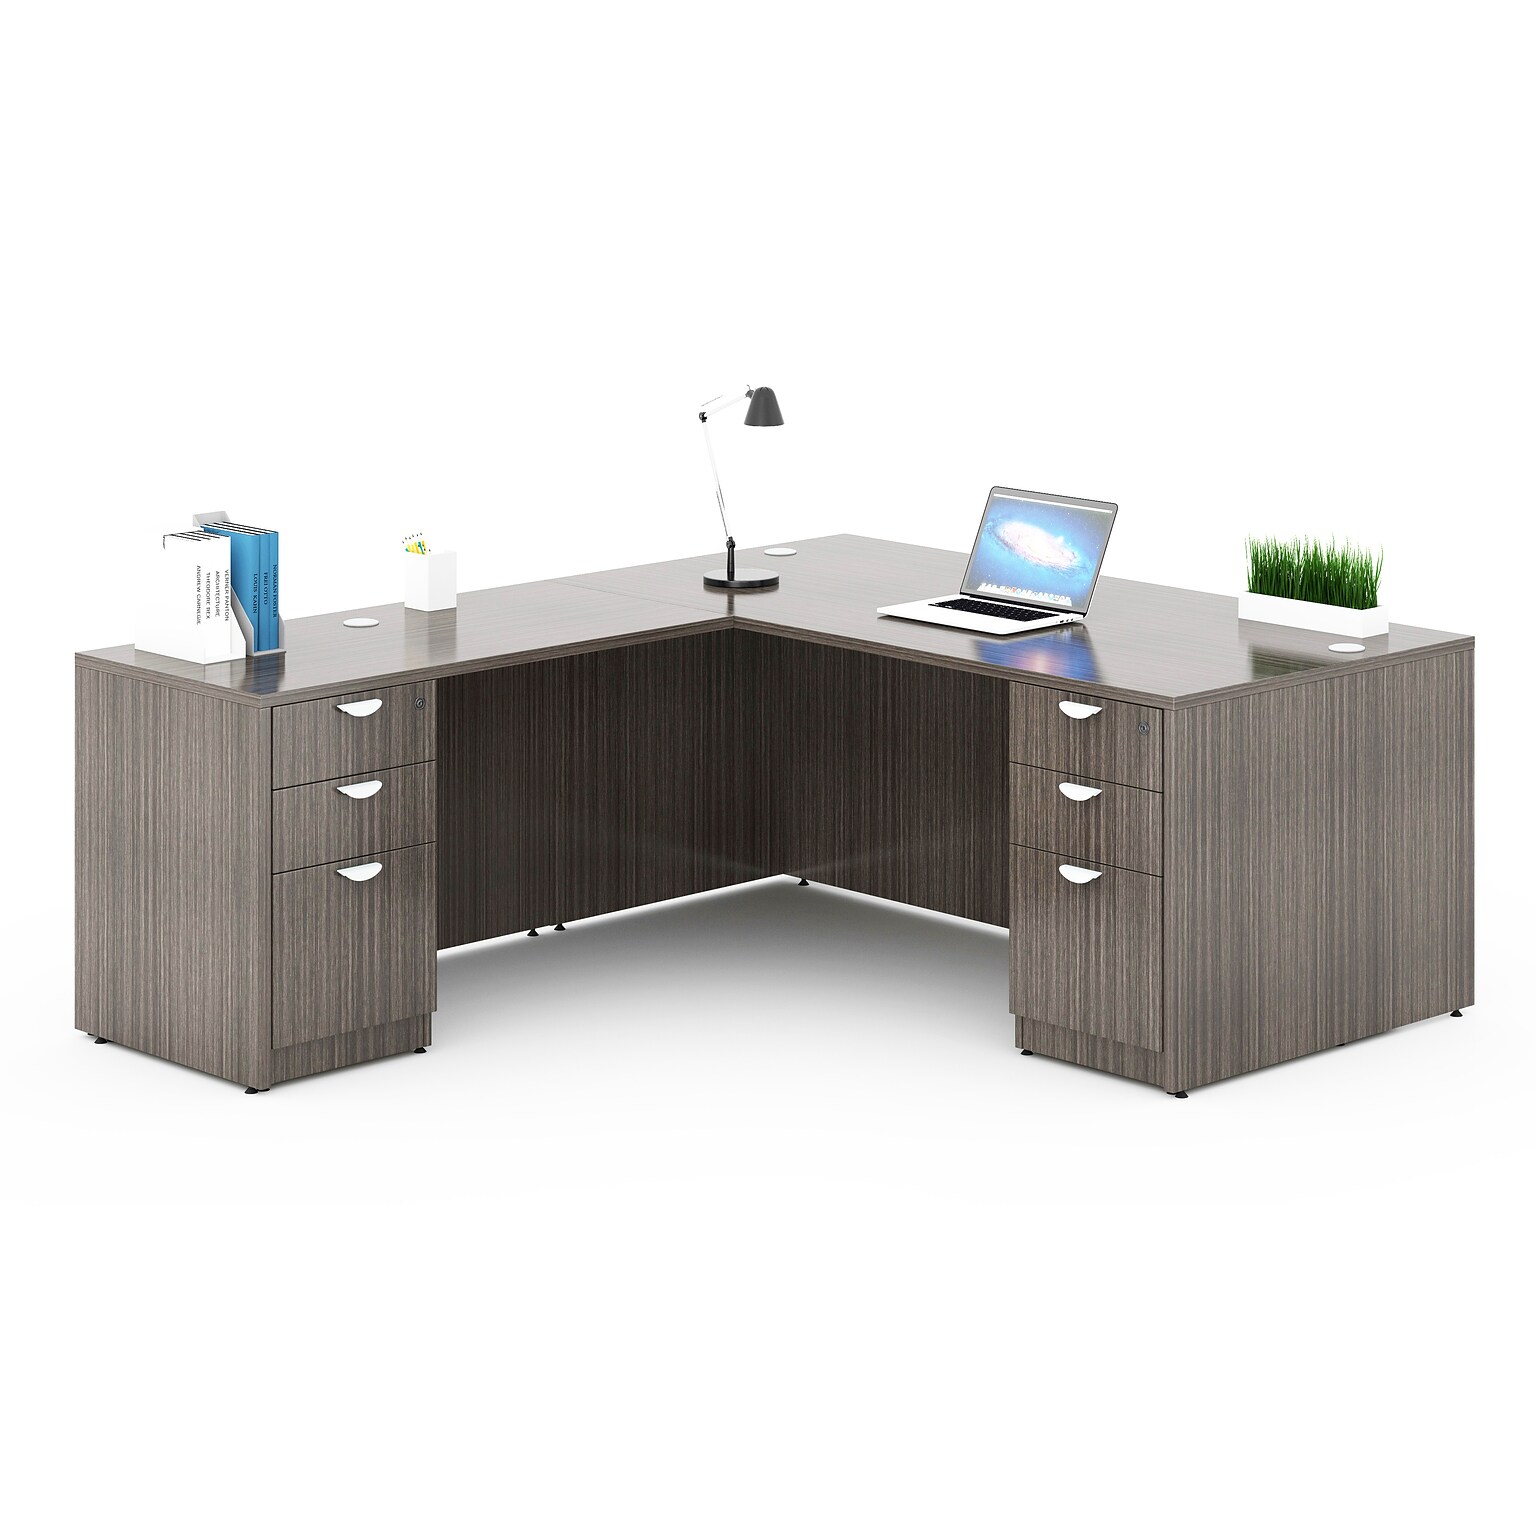 Boss Office Products 66 Executive L-Shape Corner Desk with Dual File Storage Pedestals, Driftwood (GROUPA21-DW)